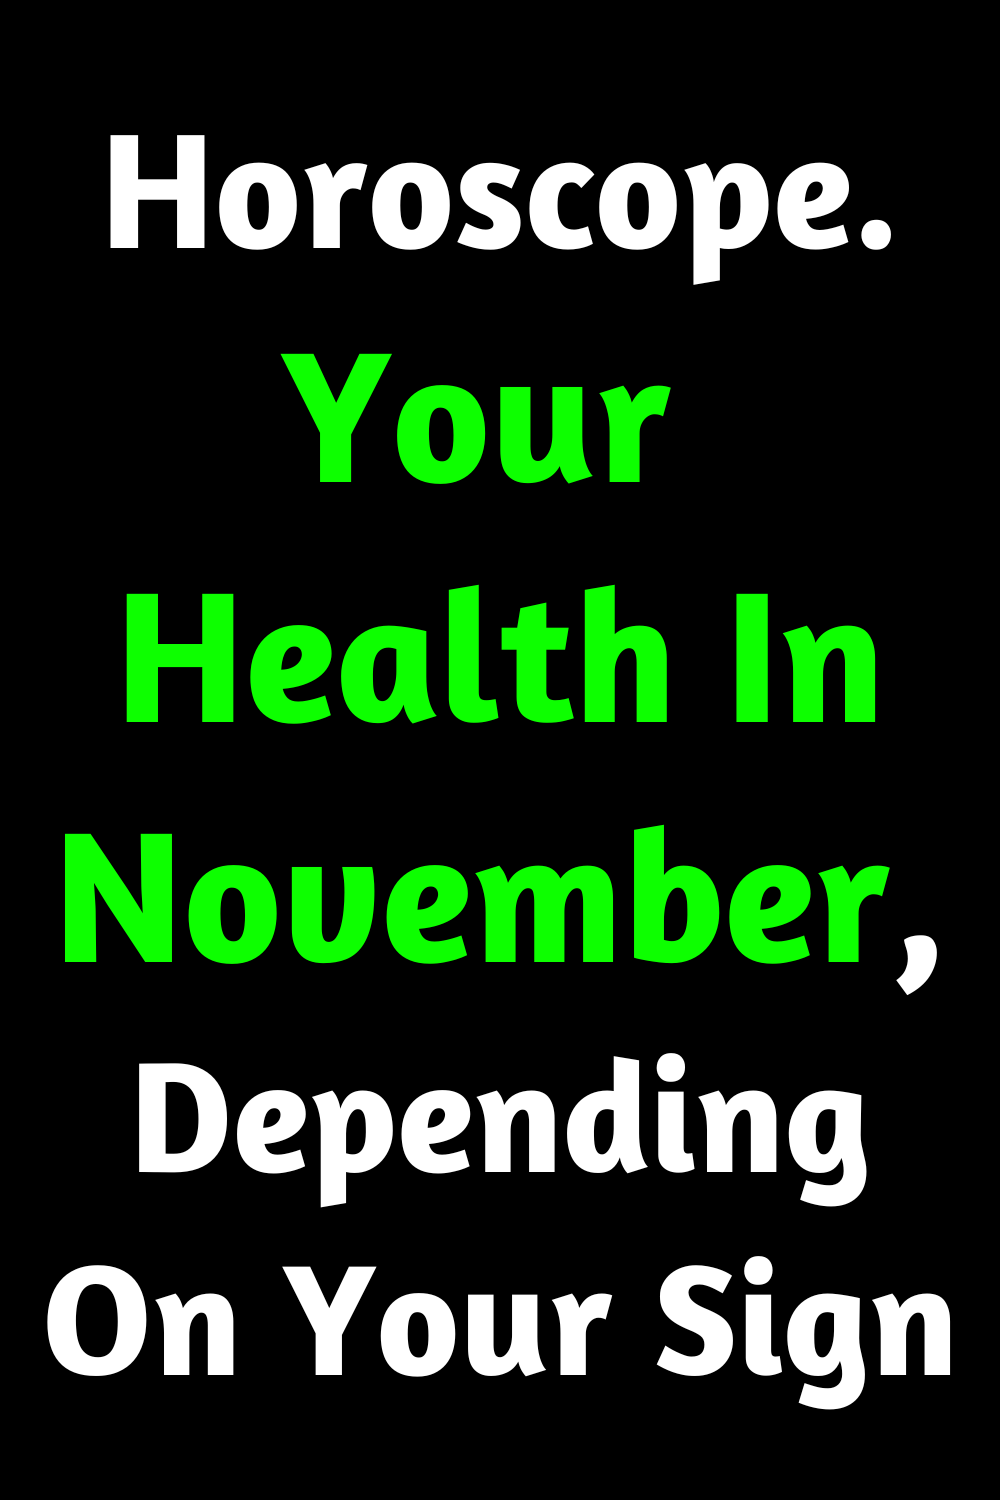 Horoscope. Your Health In November, Depending On Your Sign